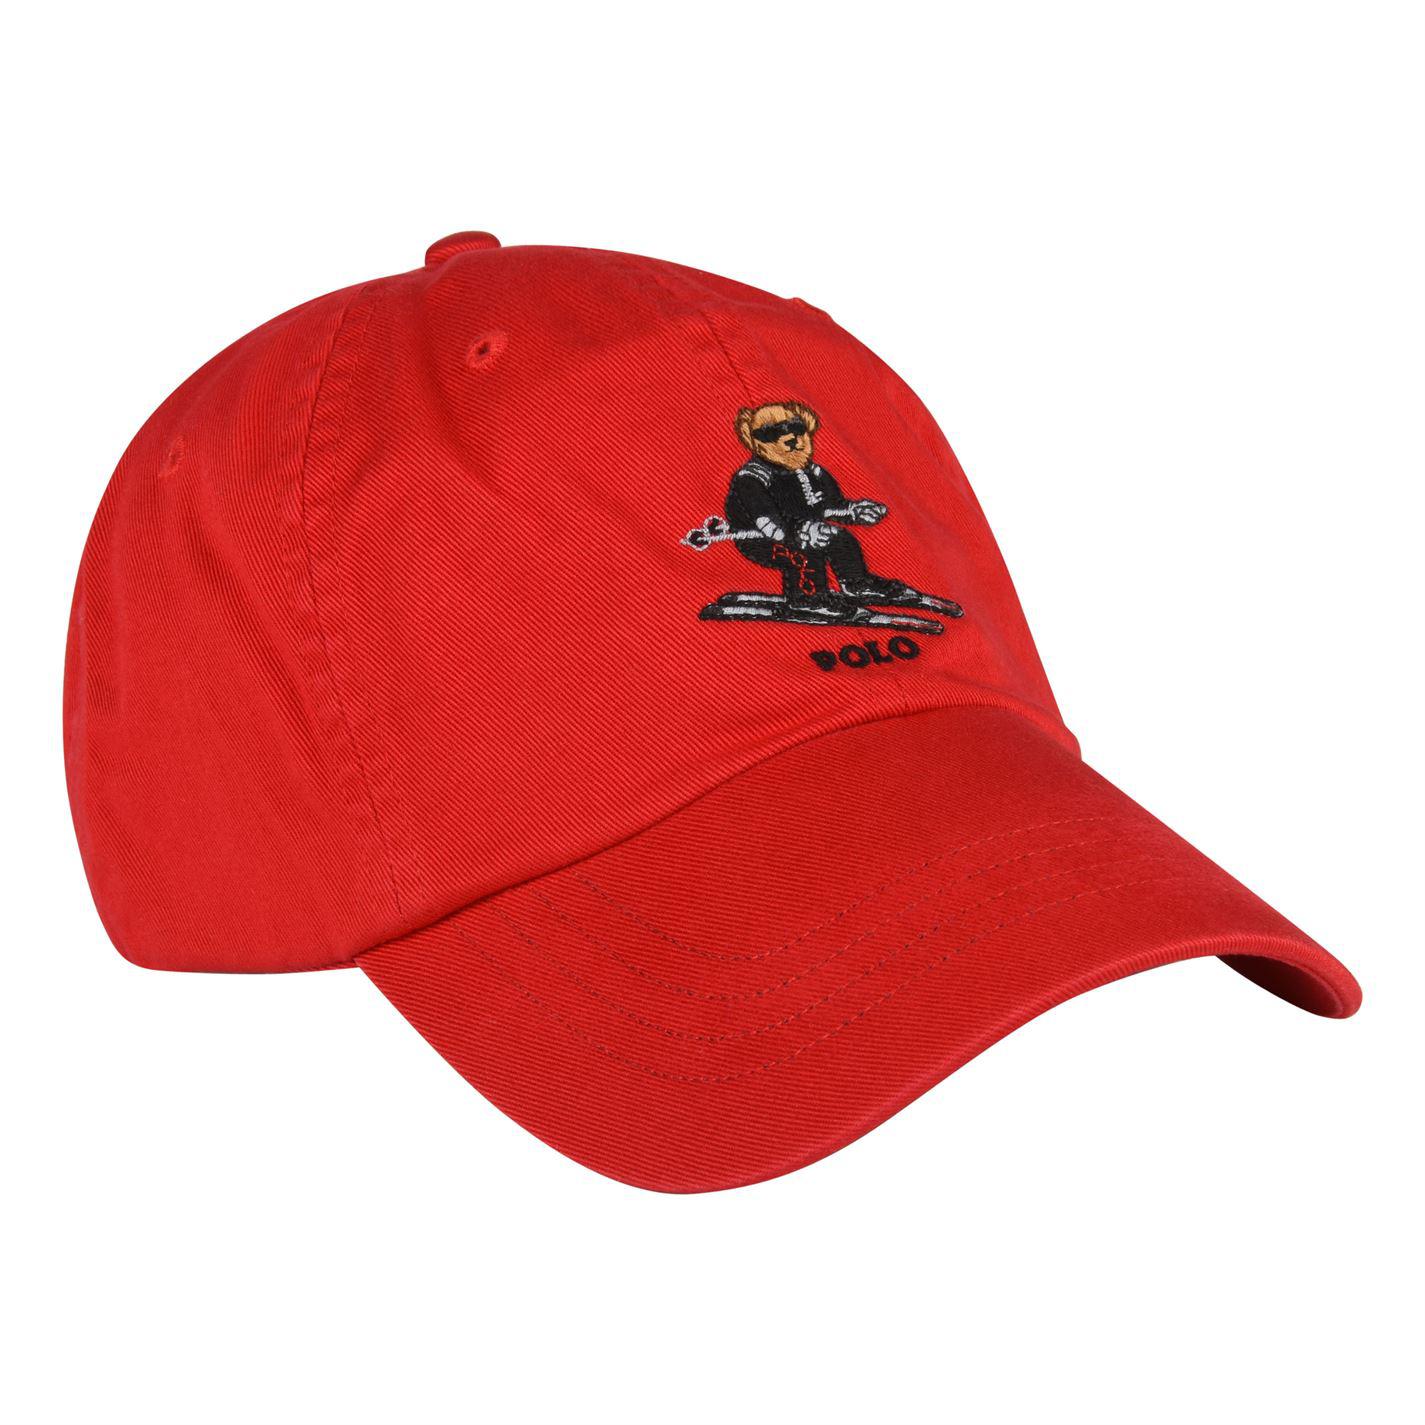 red polo hat with bear